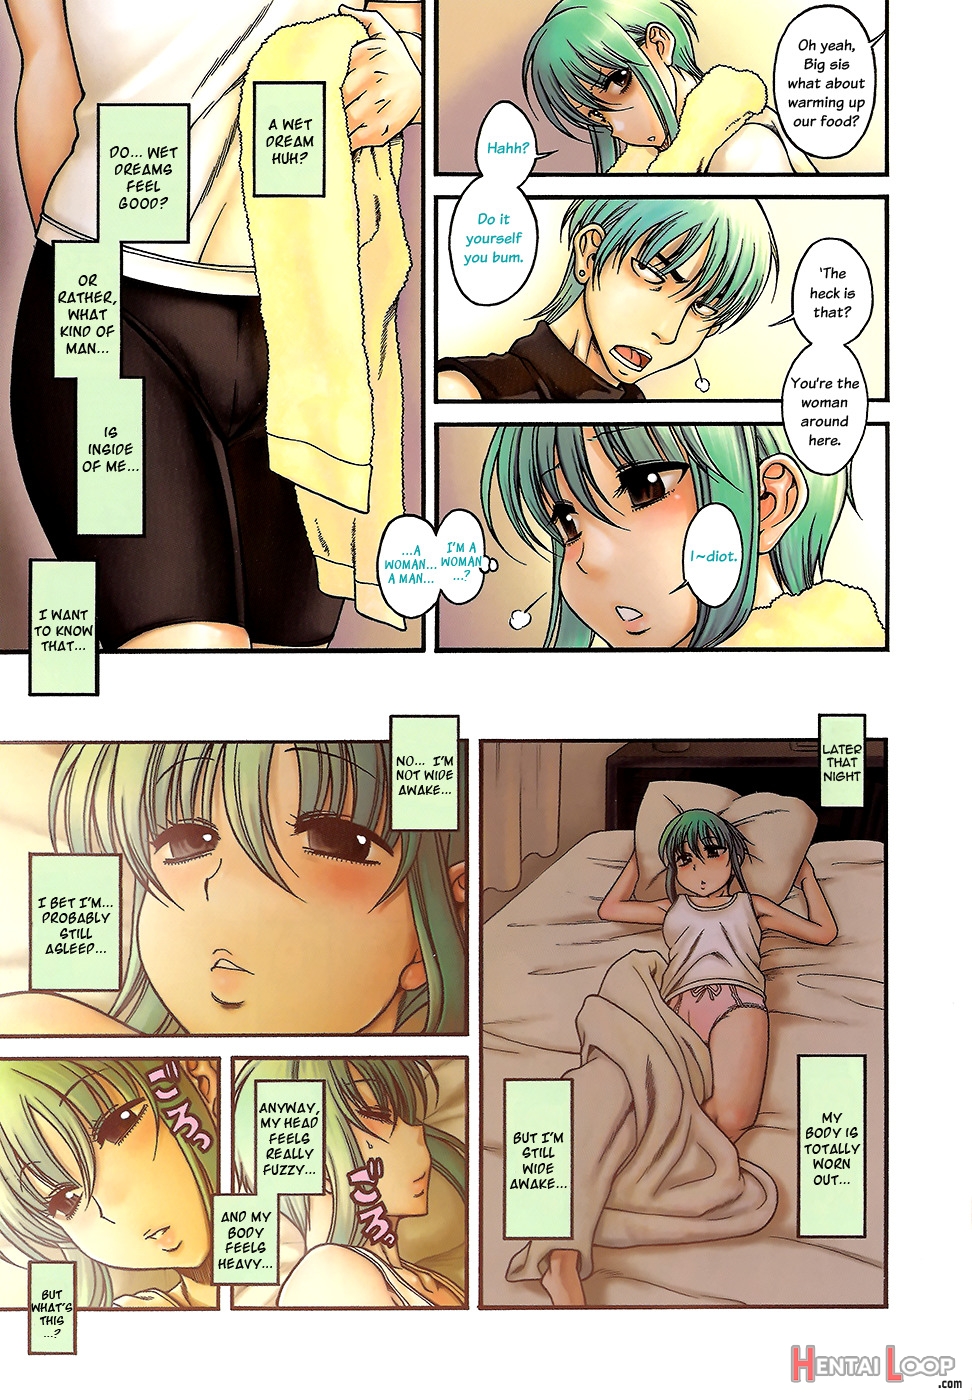 Boy Meets Girl, Girl Meets Boy Chapter 3 page 3